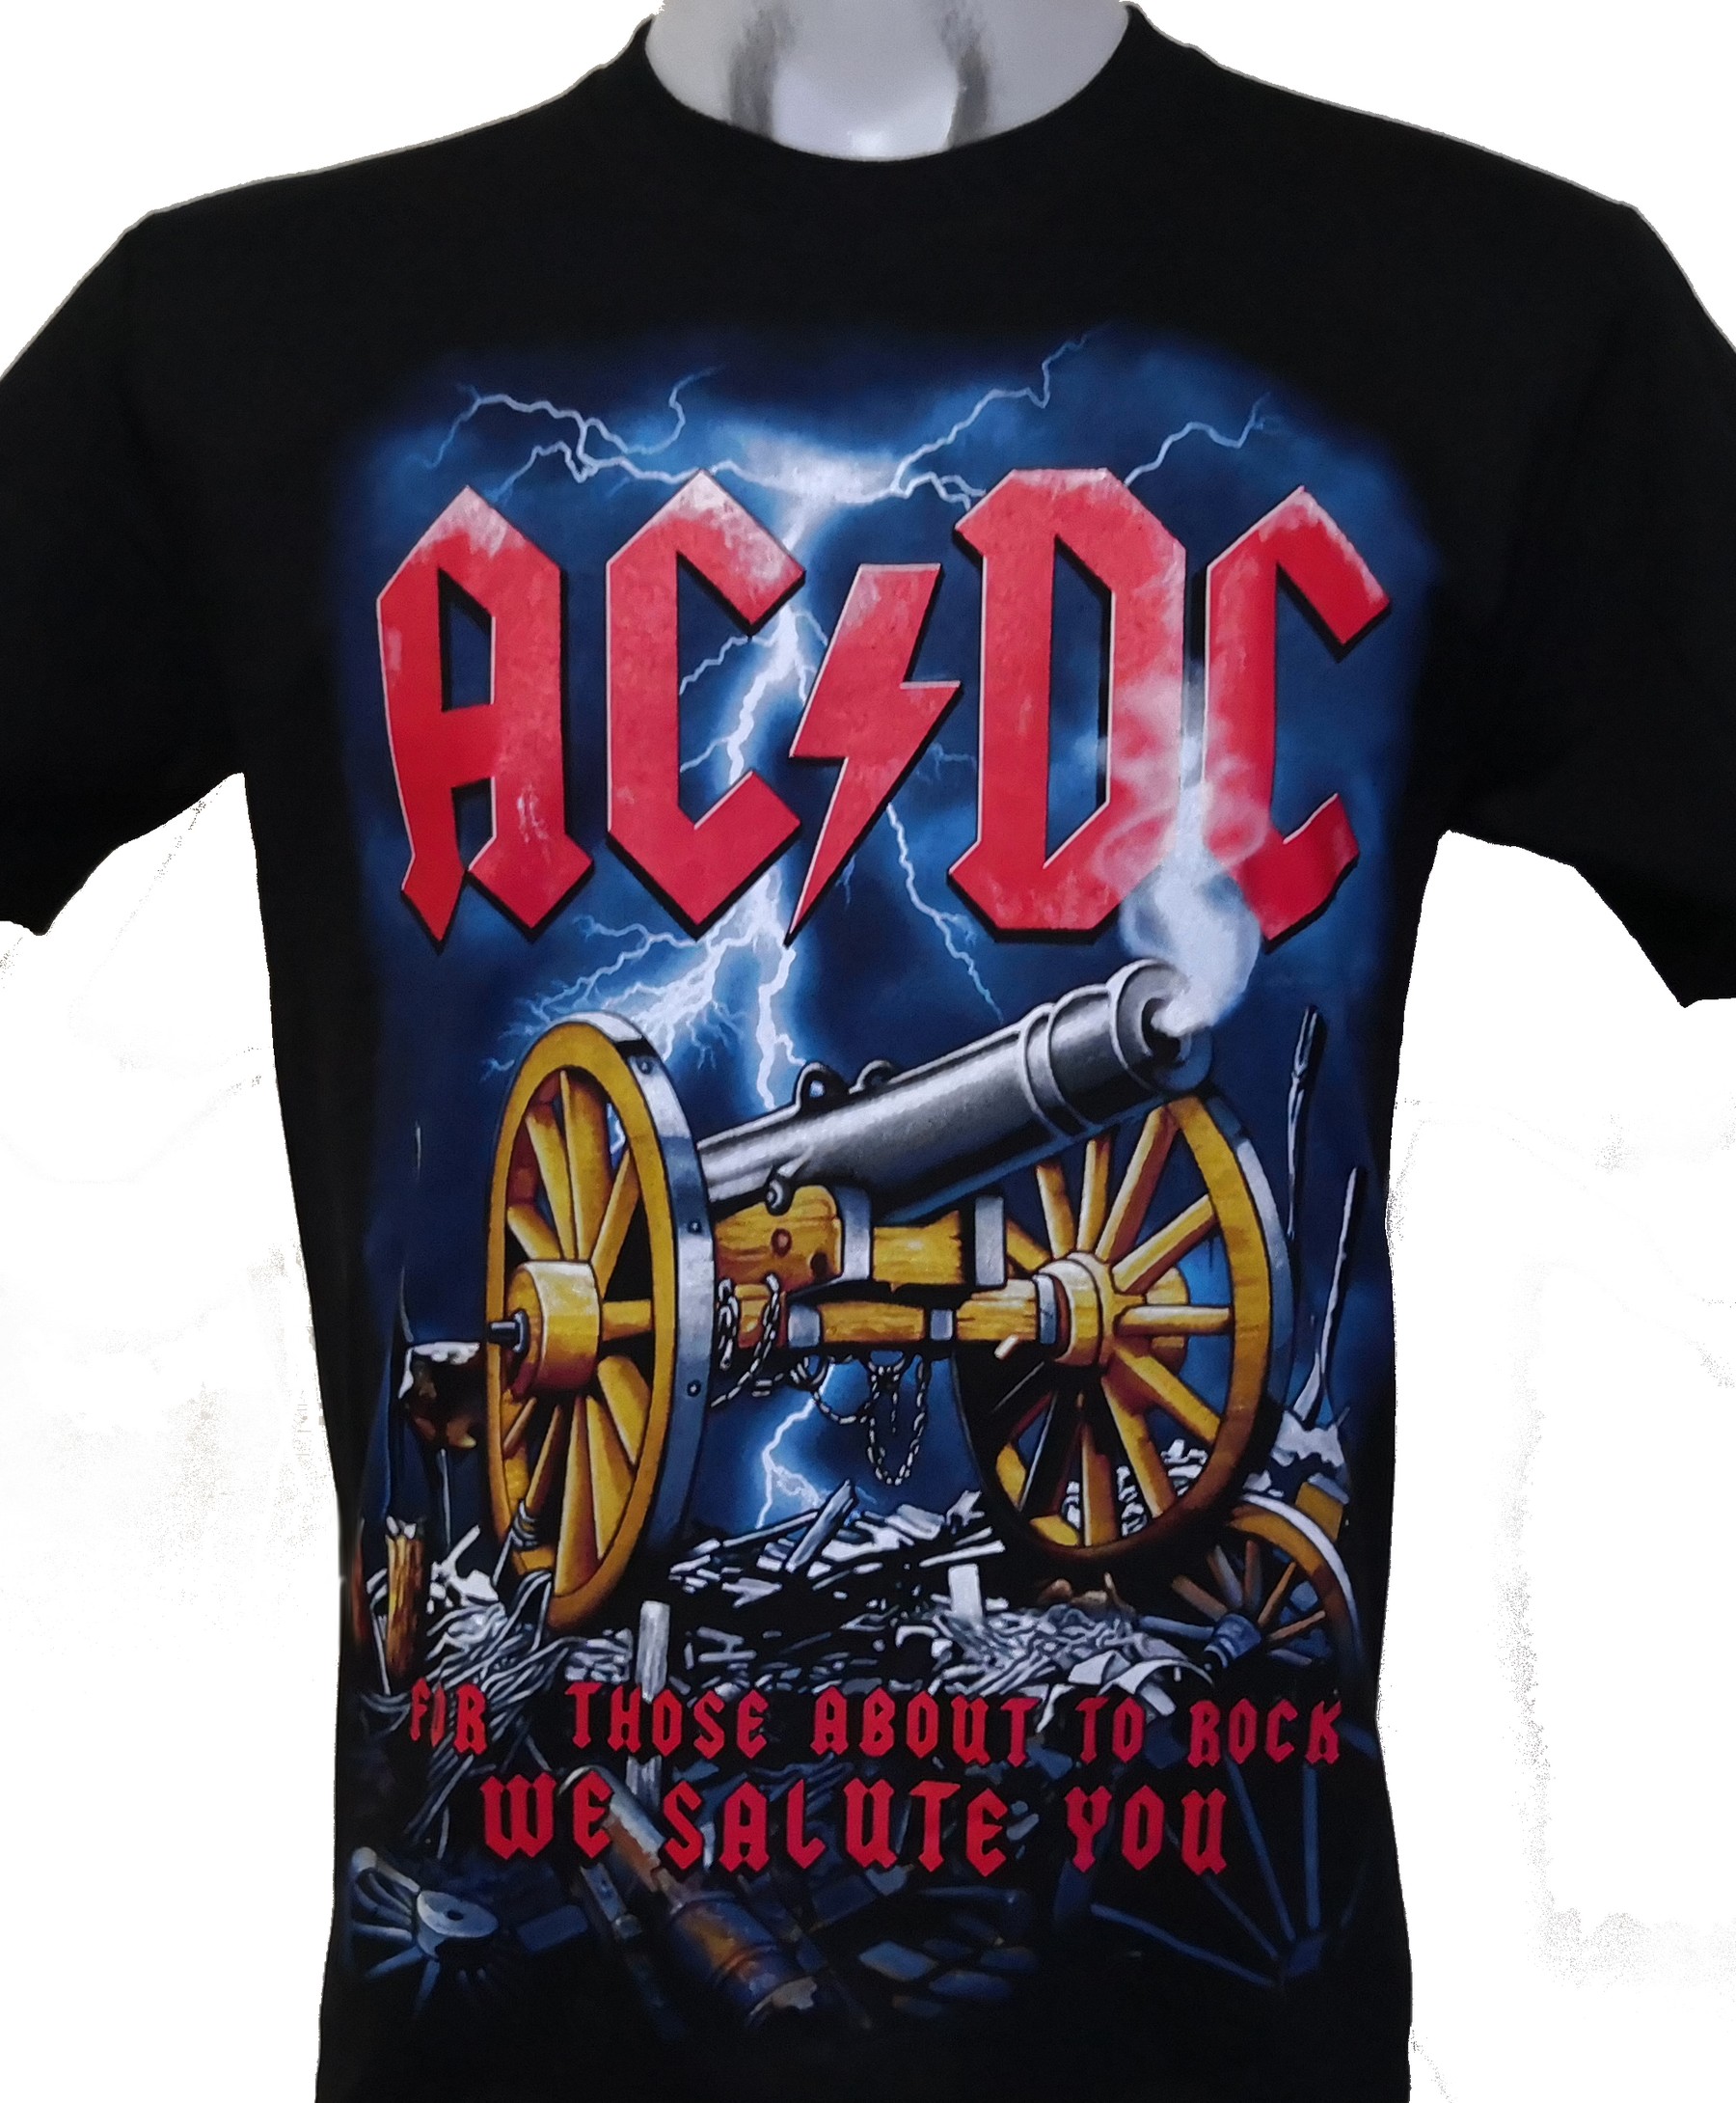 Those size AC/DC RoxxBKK Rock For About M To – t-shirt